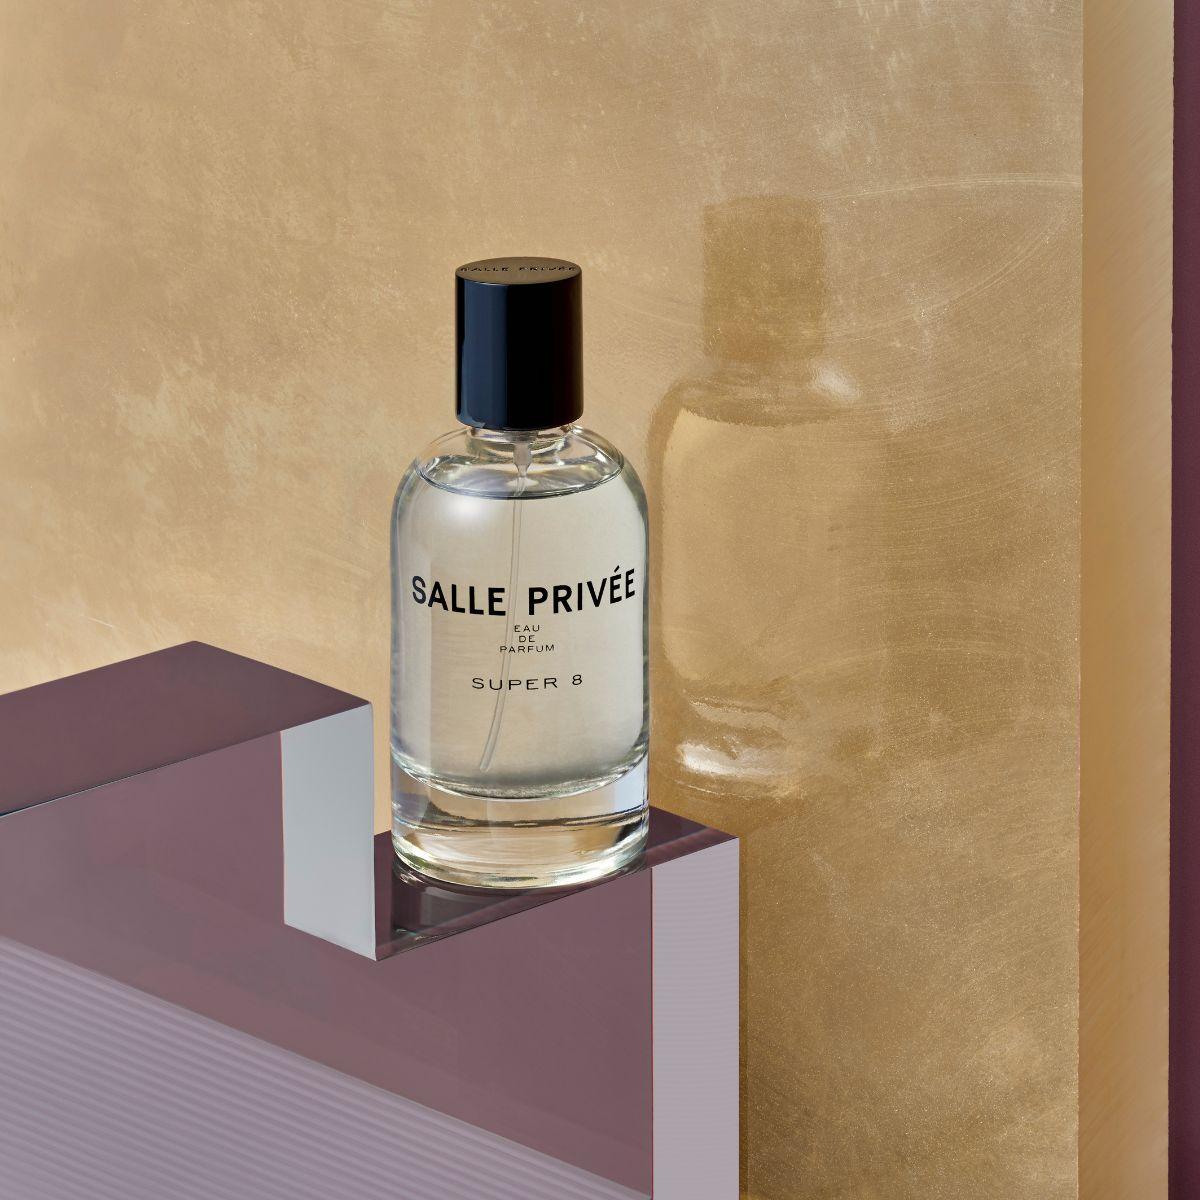 Image of Super 8 100 ml by the perfume brand Salle Privee